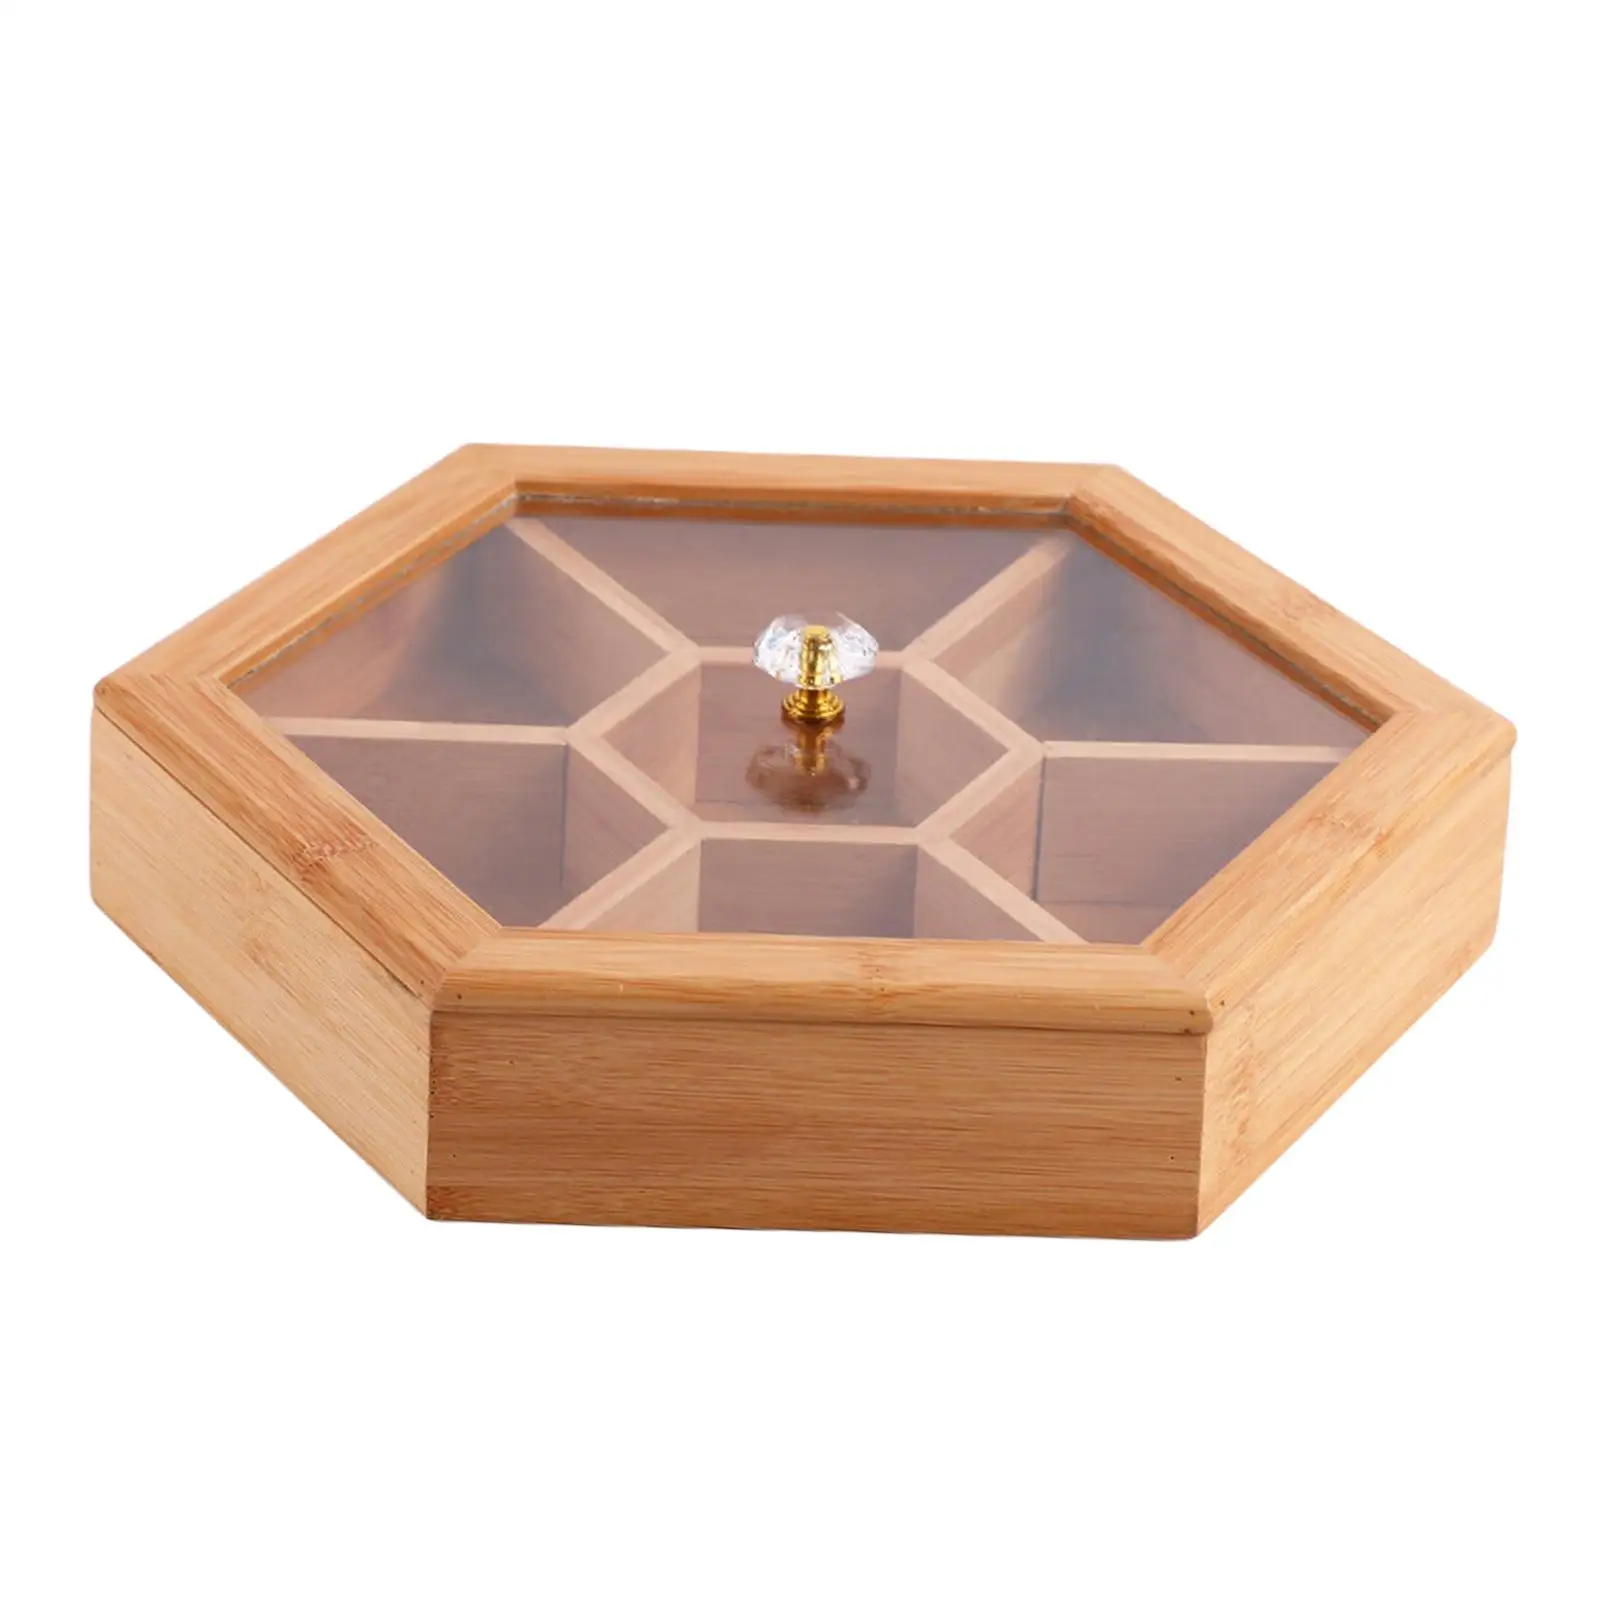 Dried Fruit Container 7 Compartment Widely Used Wooden with Cover Creative Candy Container for Home Picnic Wedding Decorative